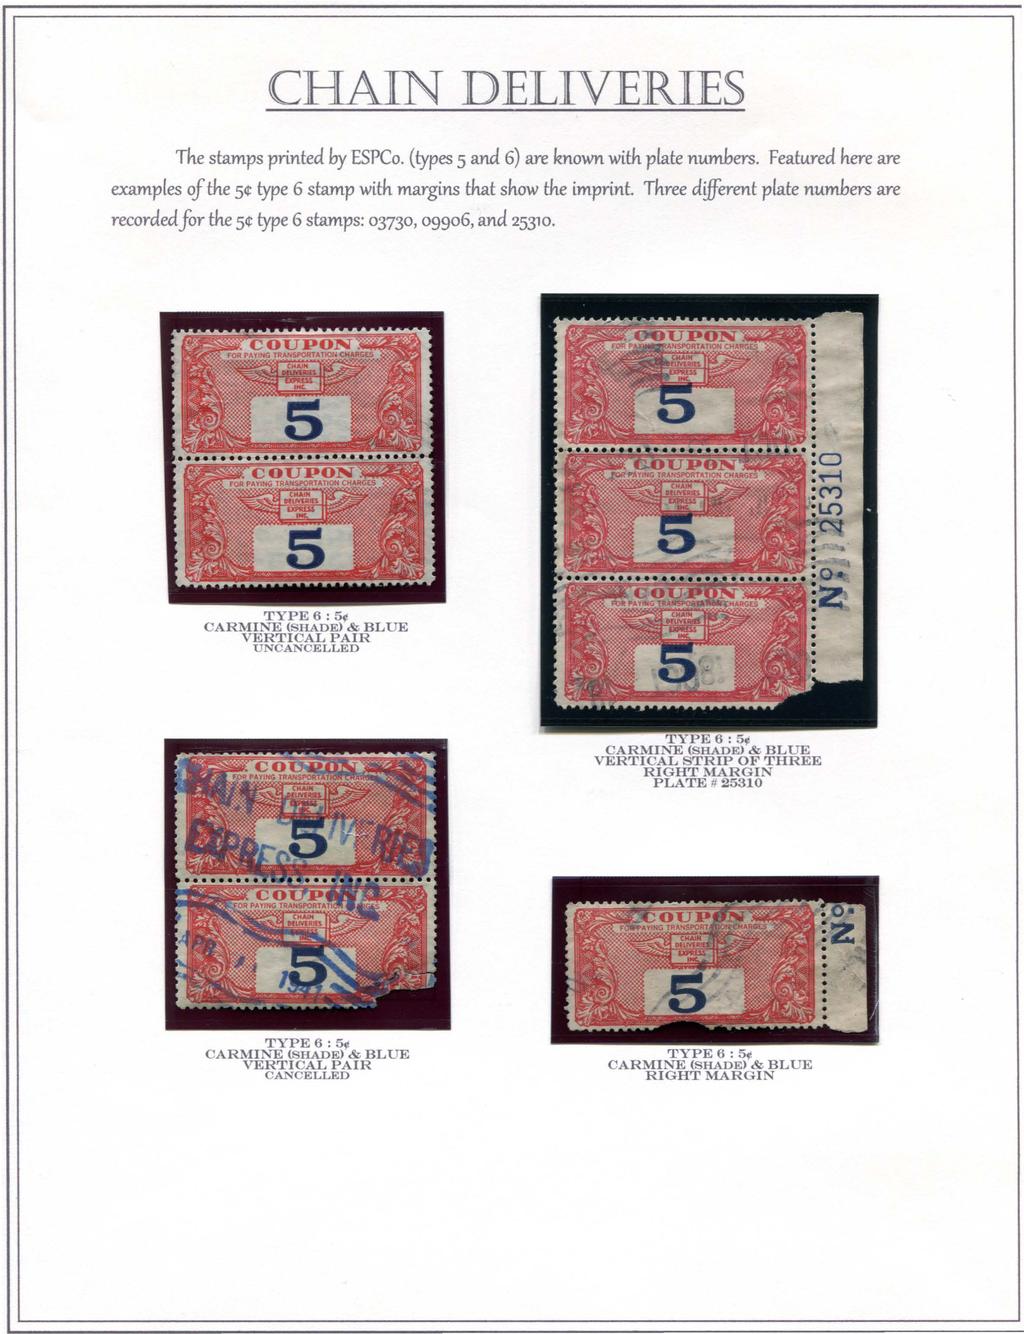 The stamps printed by ESPCo. (types 5 and 6) are known with plate numbers. Featu.